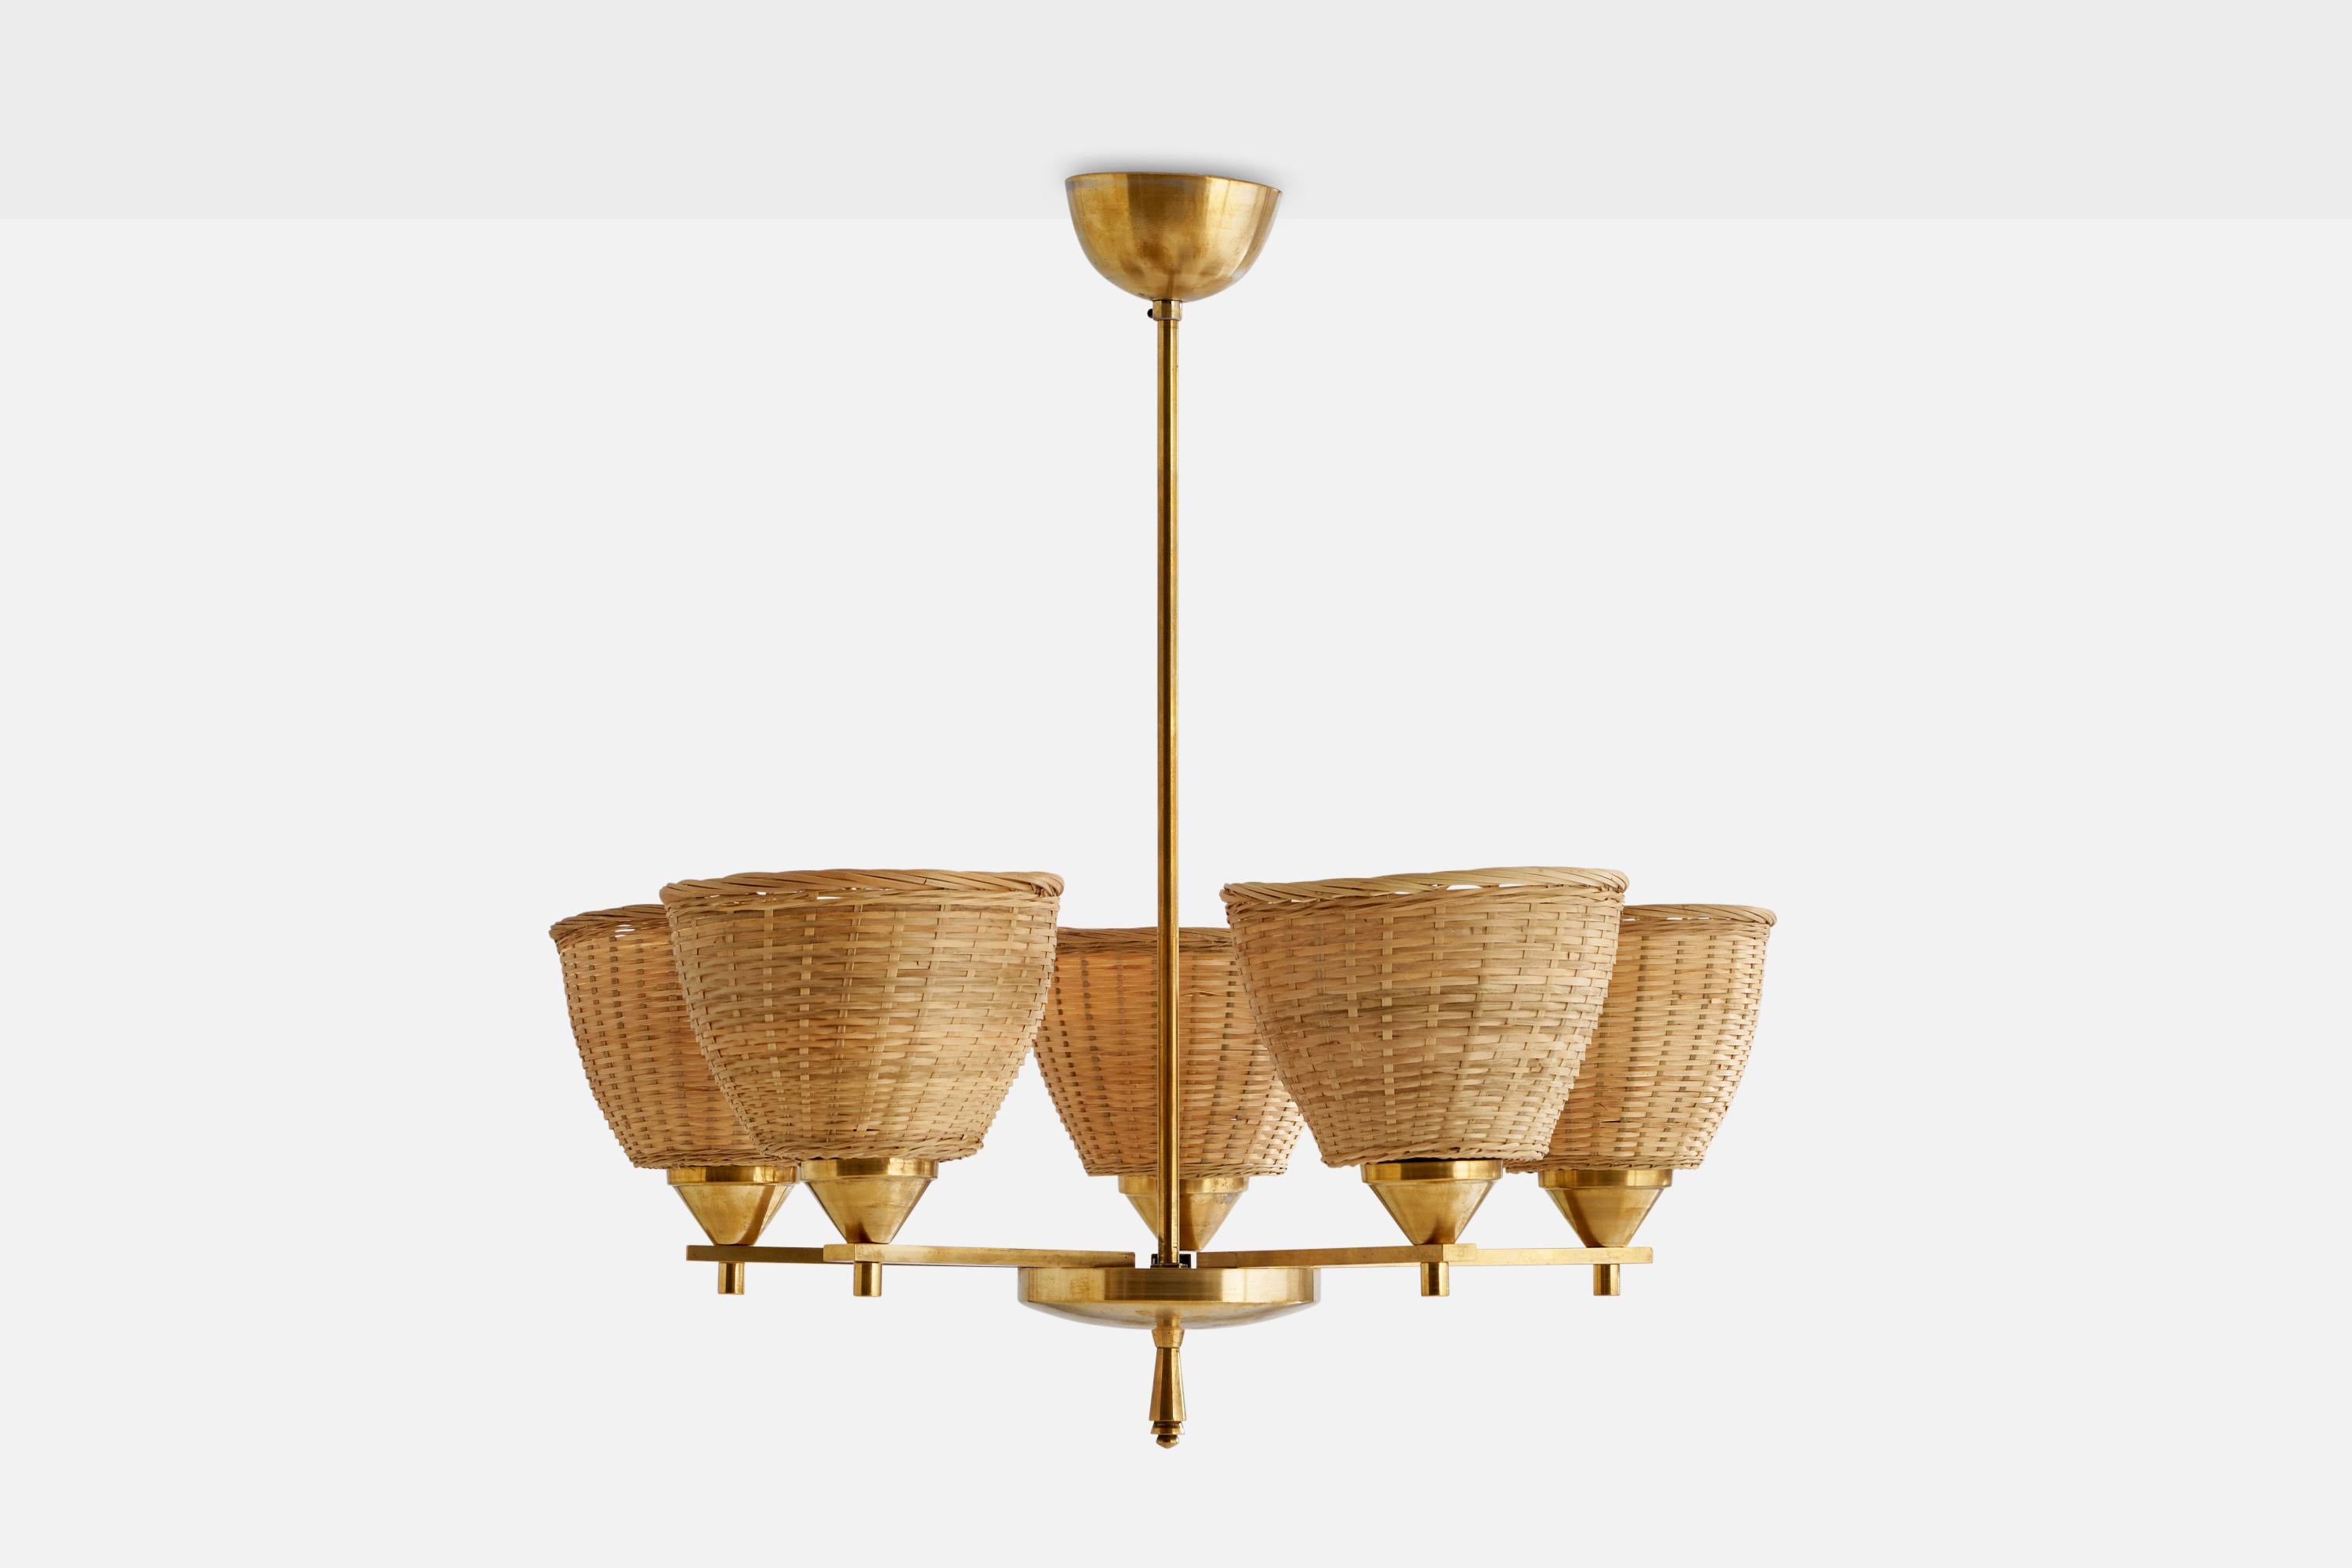 A five-armed brass and rattan chandelier, model 1356, designed by Paavo Tynell and produced by Taito Oy, Finland, 1930s.

Dimensions of canopy (inches): 2.3” H x 3.98” Diameter
Socket takes standard E-26 bulbs. 2 sockets.There is no maximum wattage